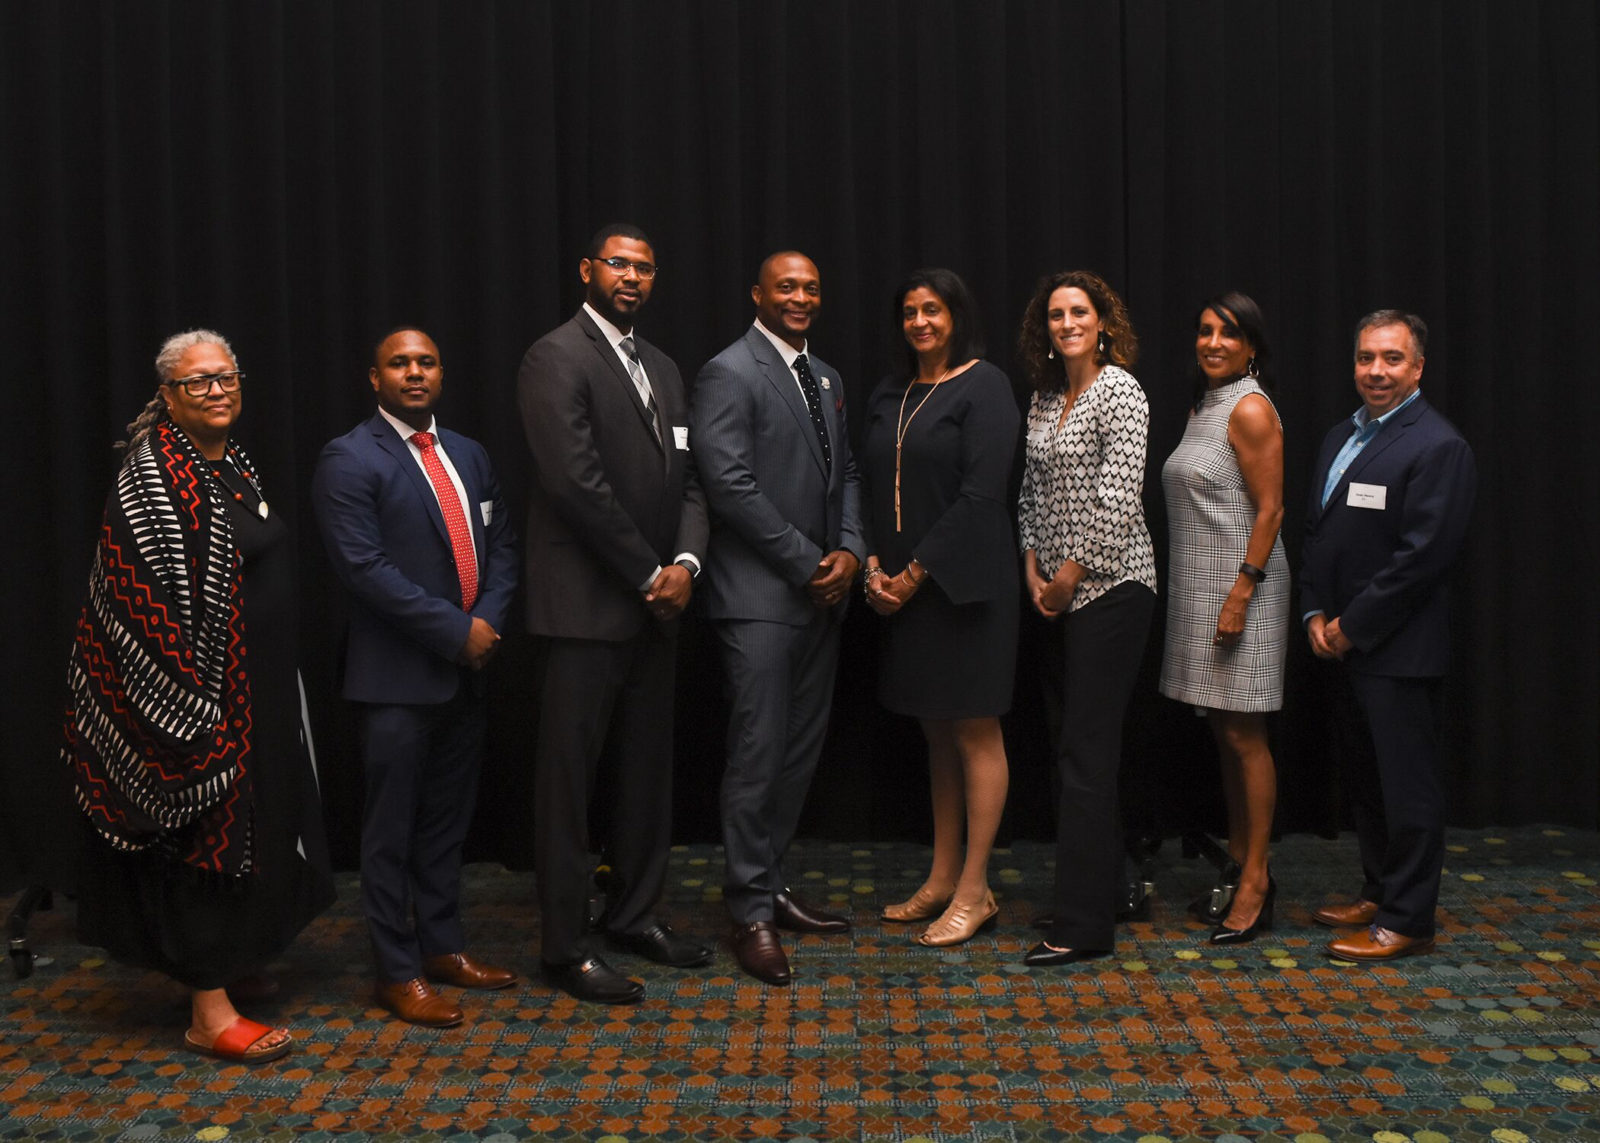 Honoree Gail Williams (fifth from left) poses with panelists (from left) Rev. Dr. Emilie M Townes, Robert Sherrill, Shan Foster, Eddie George, Stephanie White, emcee Vicki Yates and Sean Henry.(Photo by Morgan Yingling)